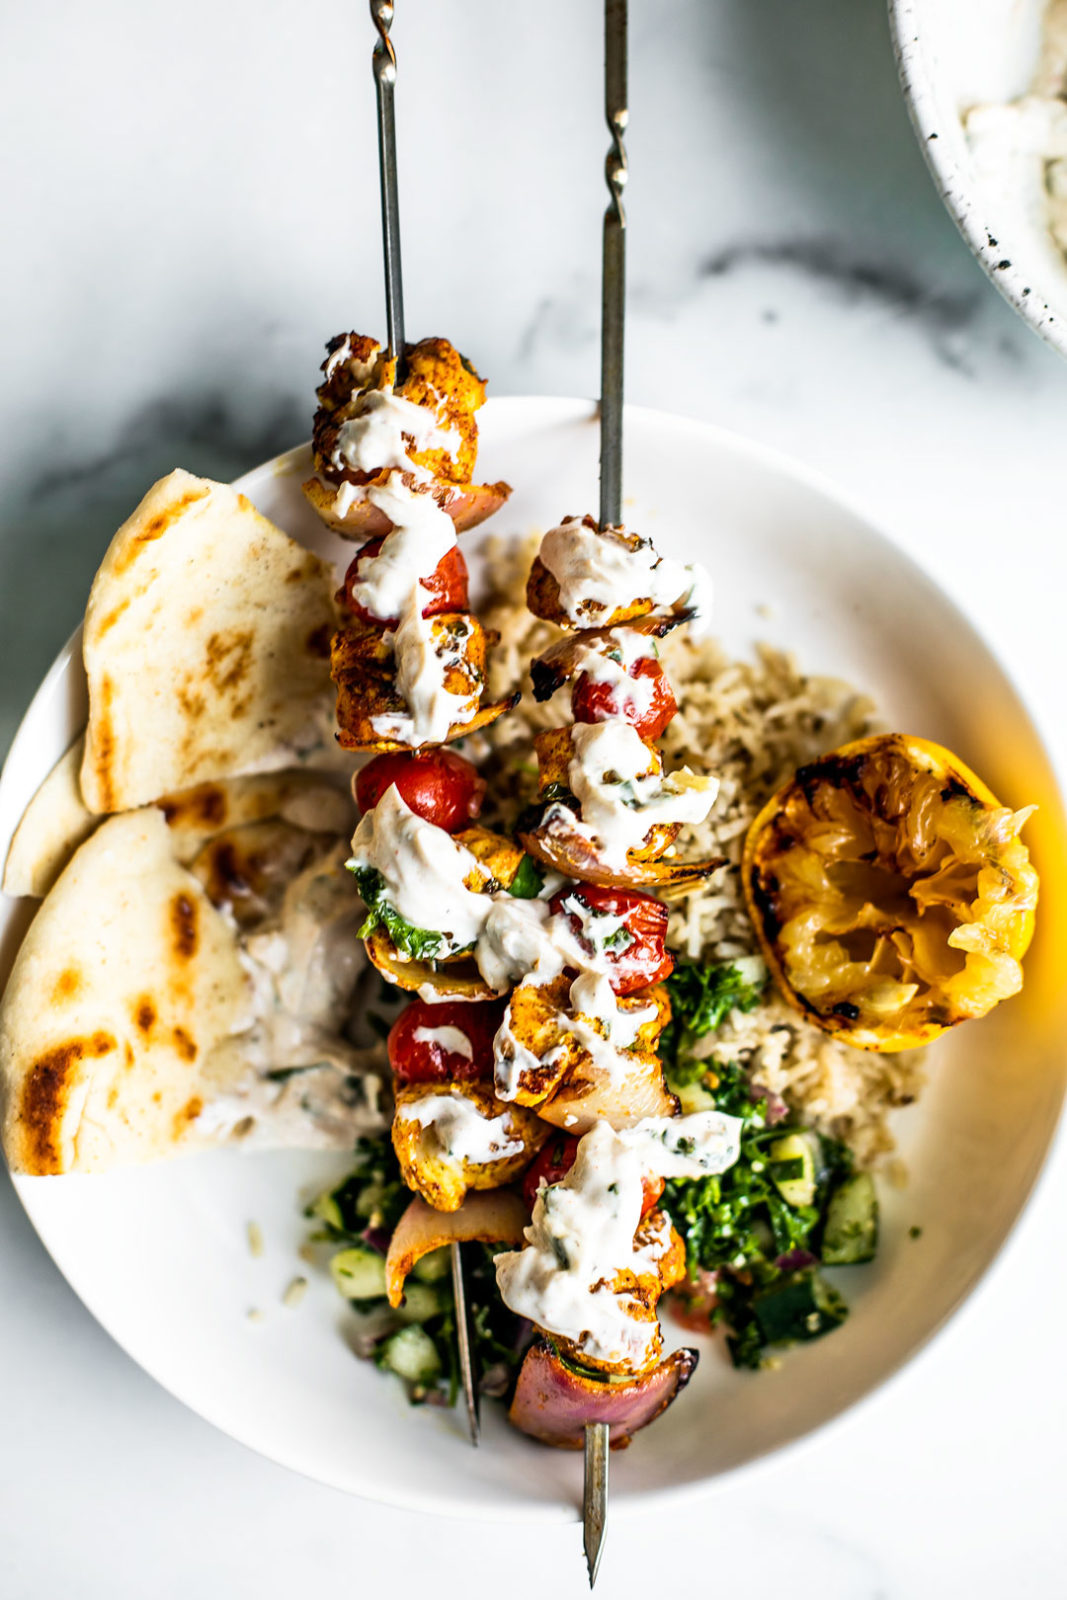 Chicken skewers smothered in Greek yogurt sauce over pitas and rice.